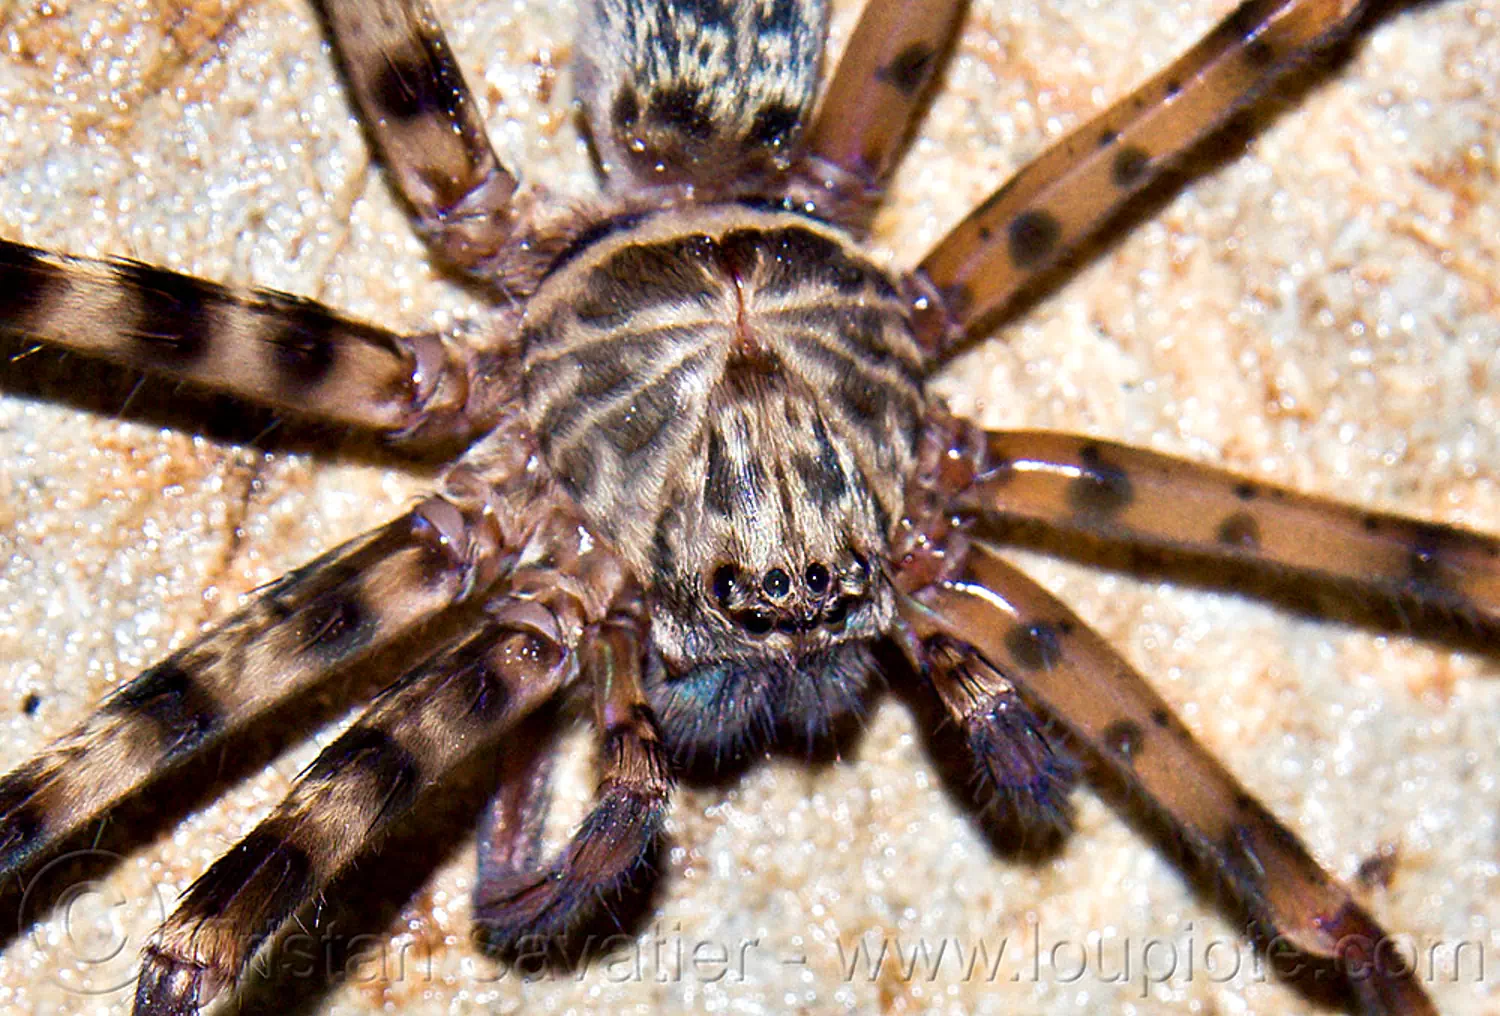 huntsman spider - close-up, borneo, cave spider, caving, close-up, eyes, giant crab spider, gunung mulu national park, huntsman spider, lang cave, limestone, malaysia, natural cave, sparassidae, spelunking, wildlife